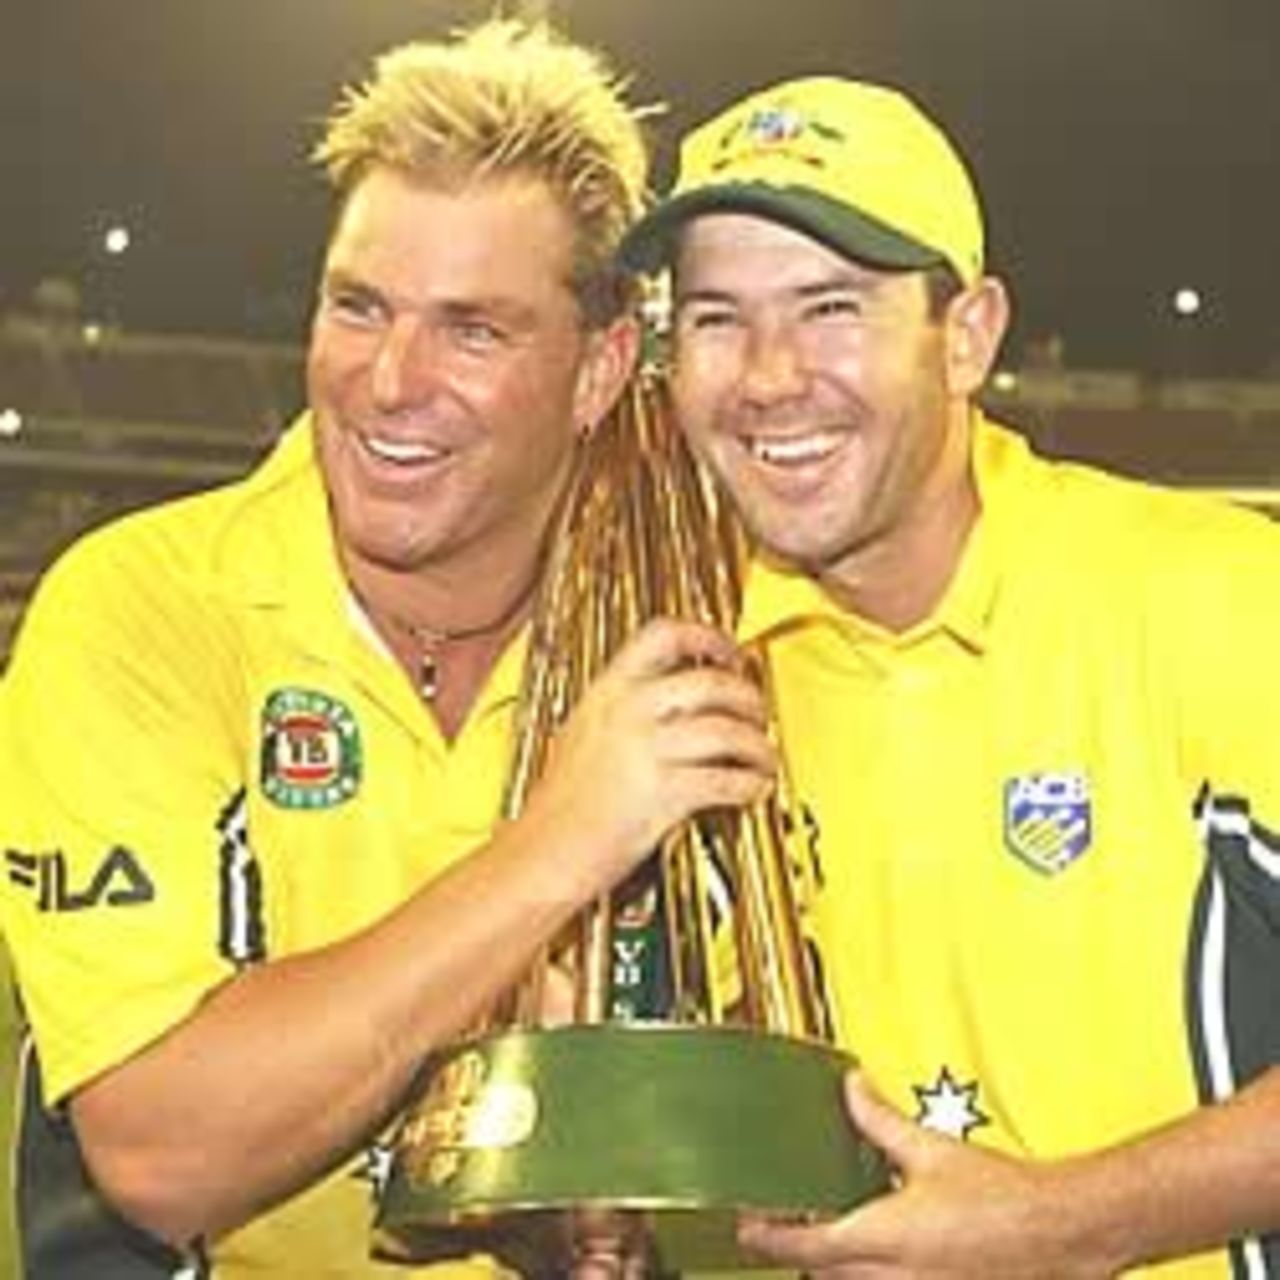 MELBOURNE - JANUARY 25: Shane Warne of Australia celebrates with Australian captain Ricky Ponting after Australia won the second match and secured the One Day International finals series between Australia and England at the Melbourne Cricket Ground in Melbourne, Australia on January 25, 2003. Australia won by five runs.